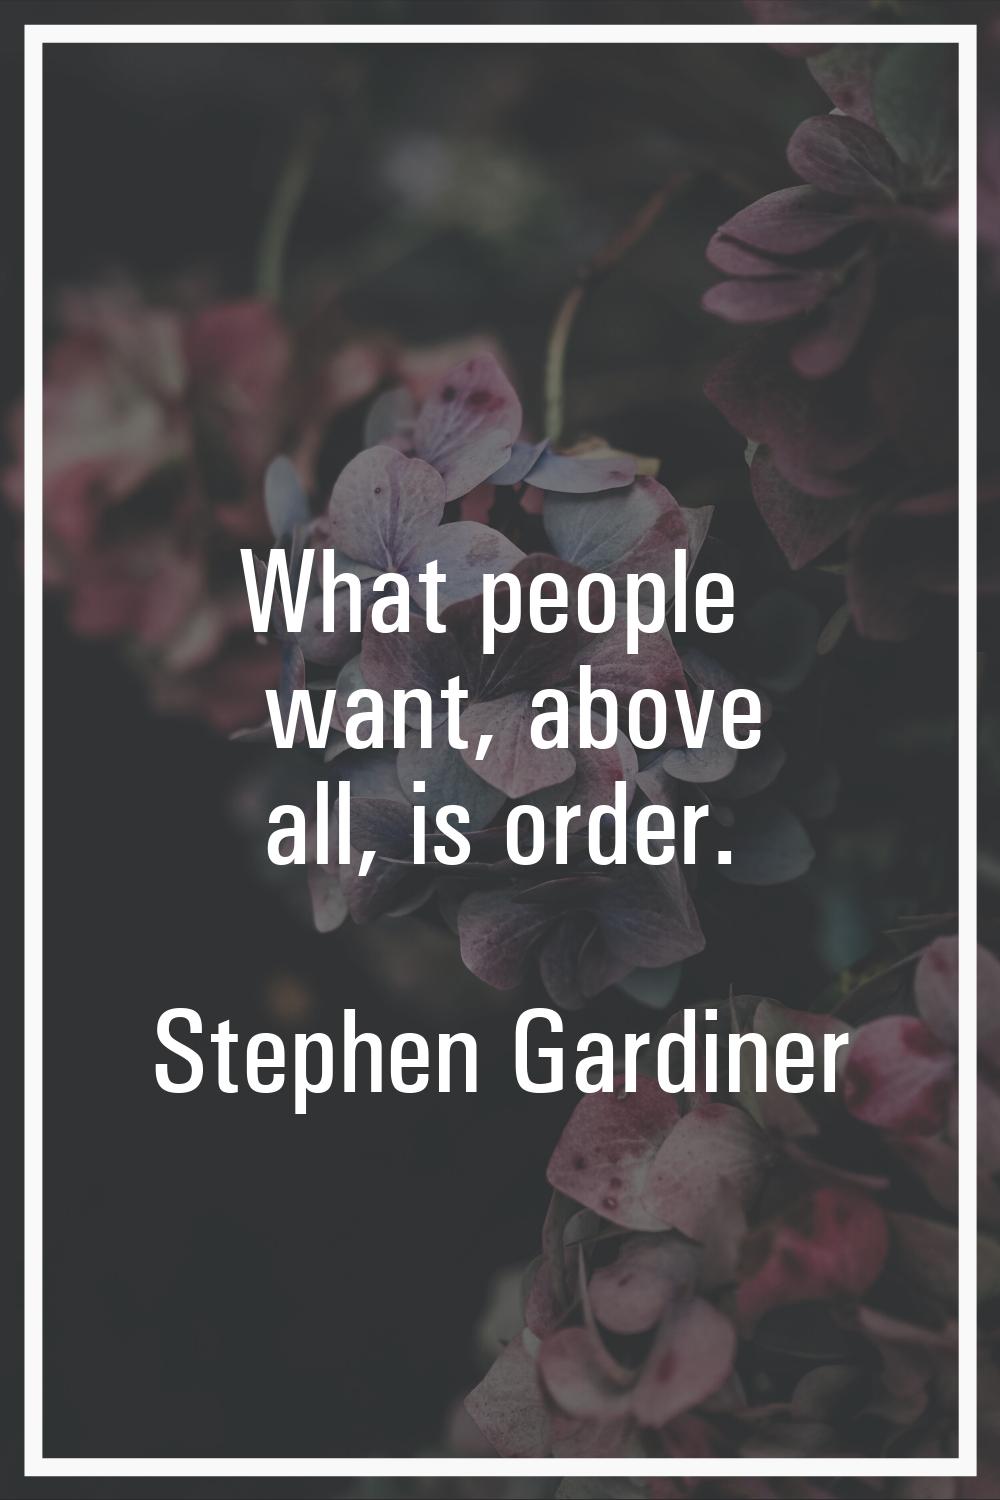 What people want, above all, is order.